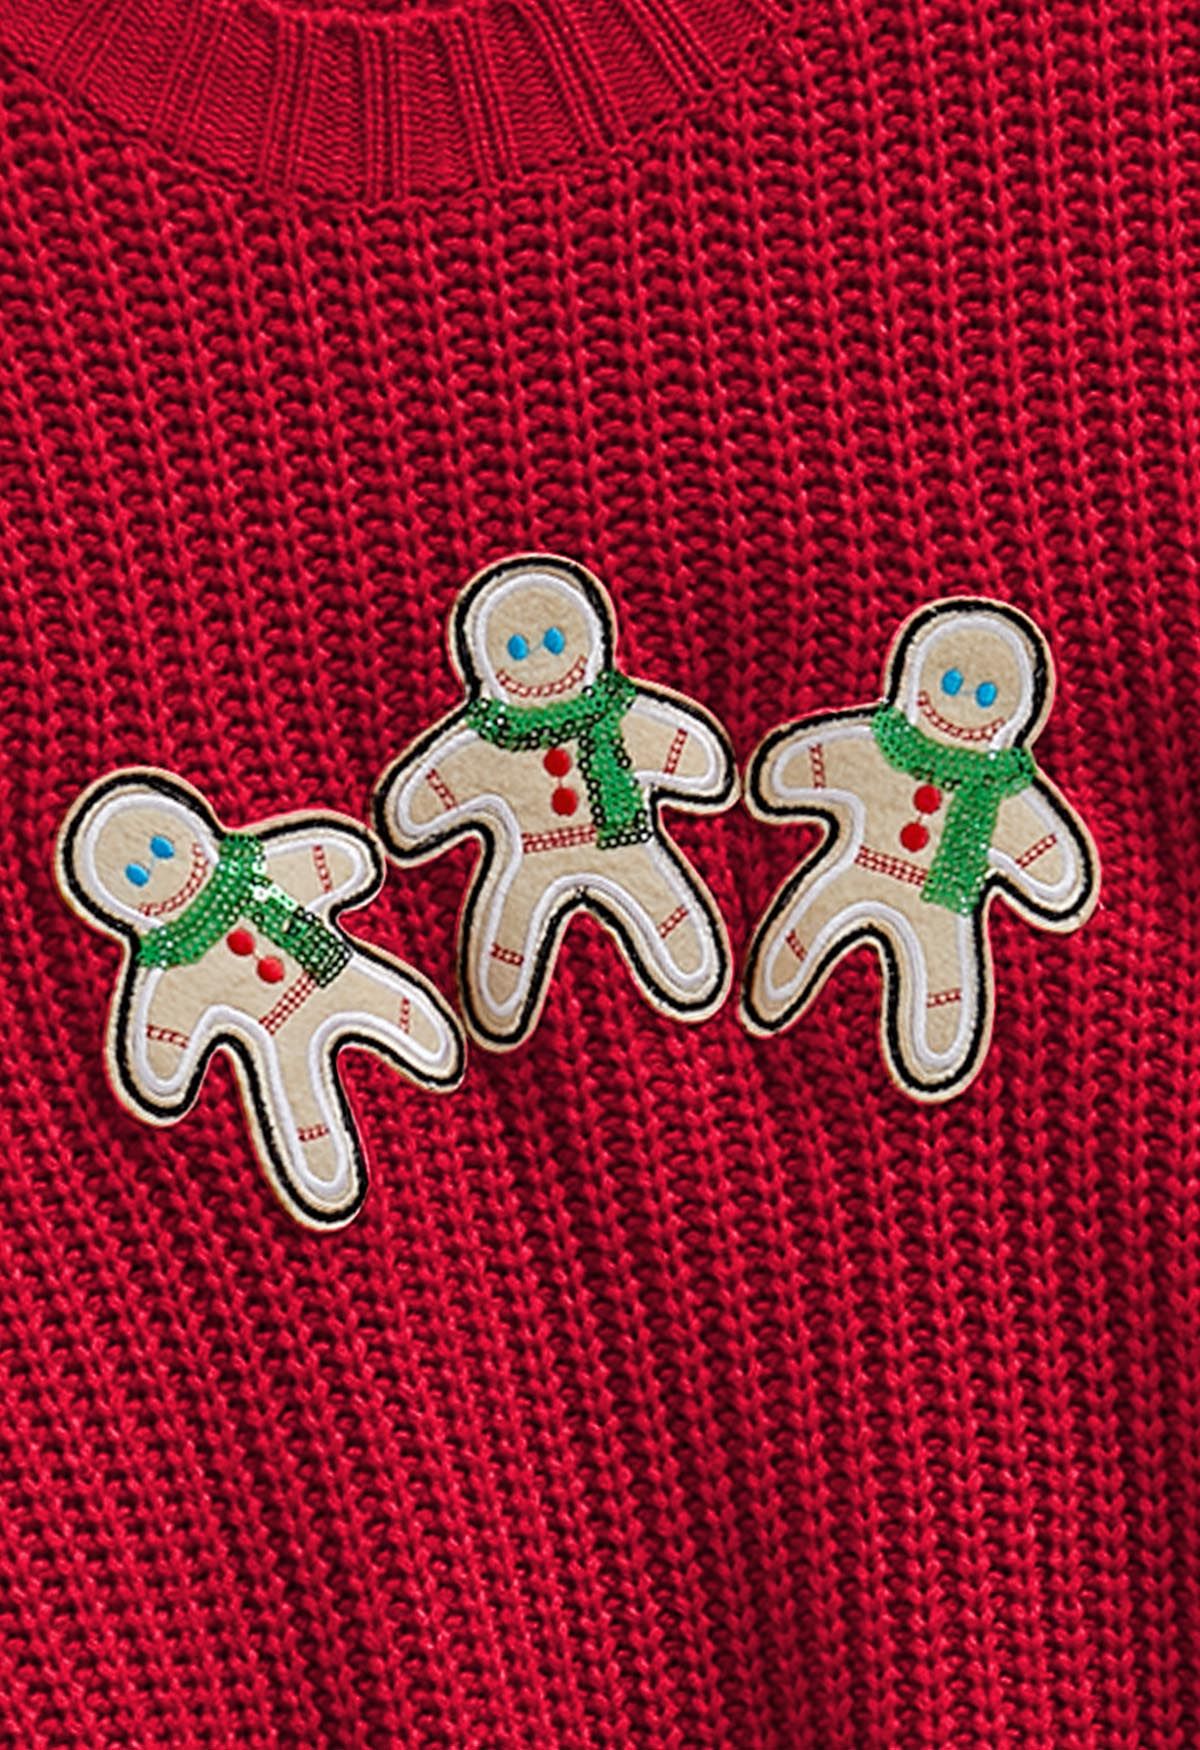 Gingerbread Man Patch Ribbed Sweater in Red